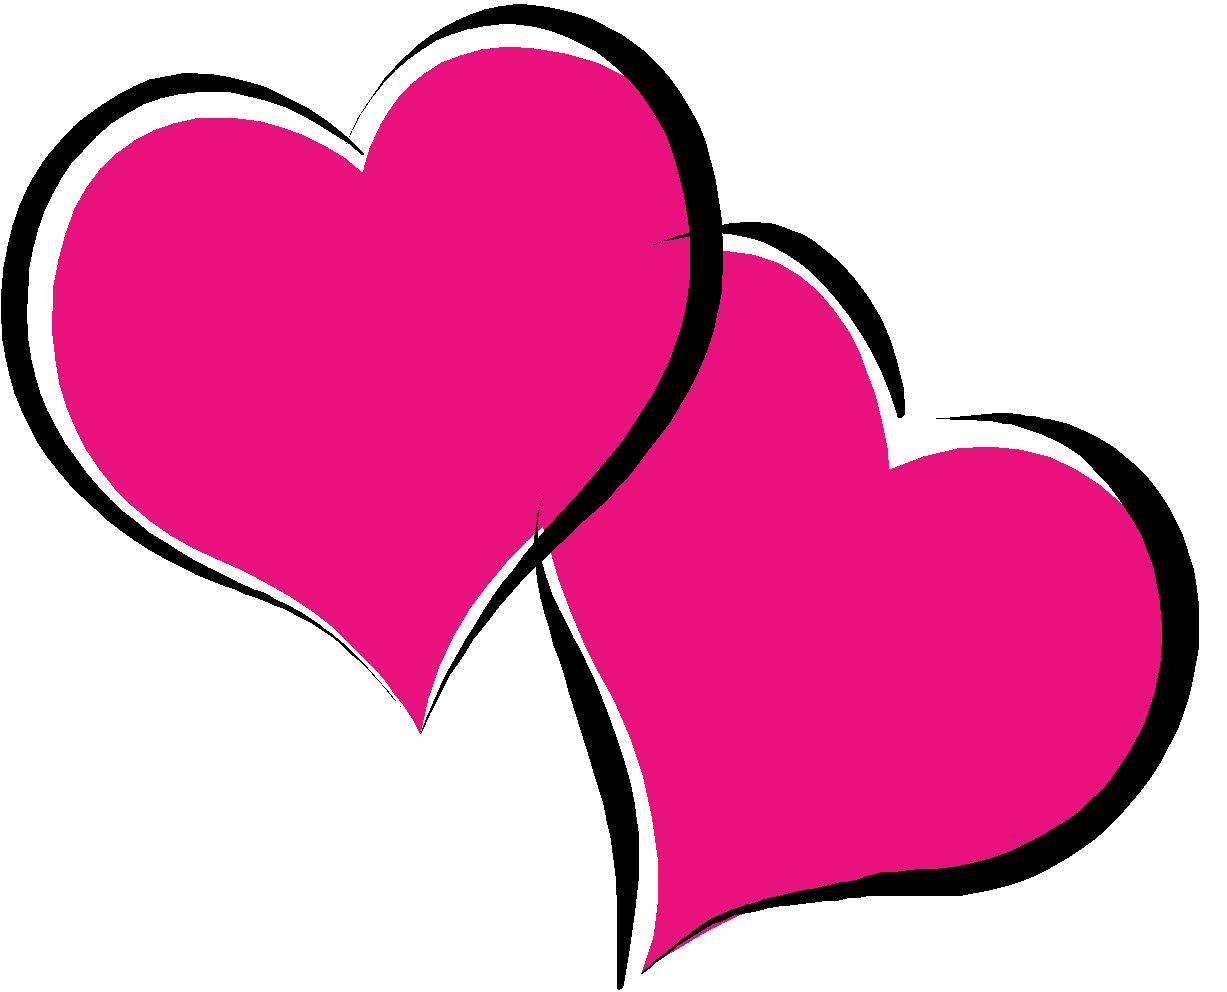 Free heart images clip art